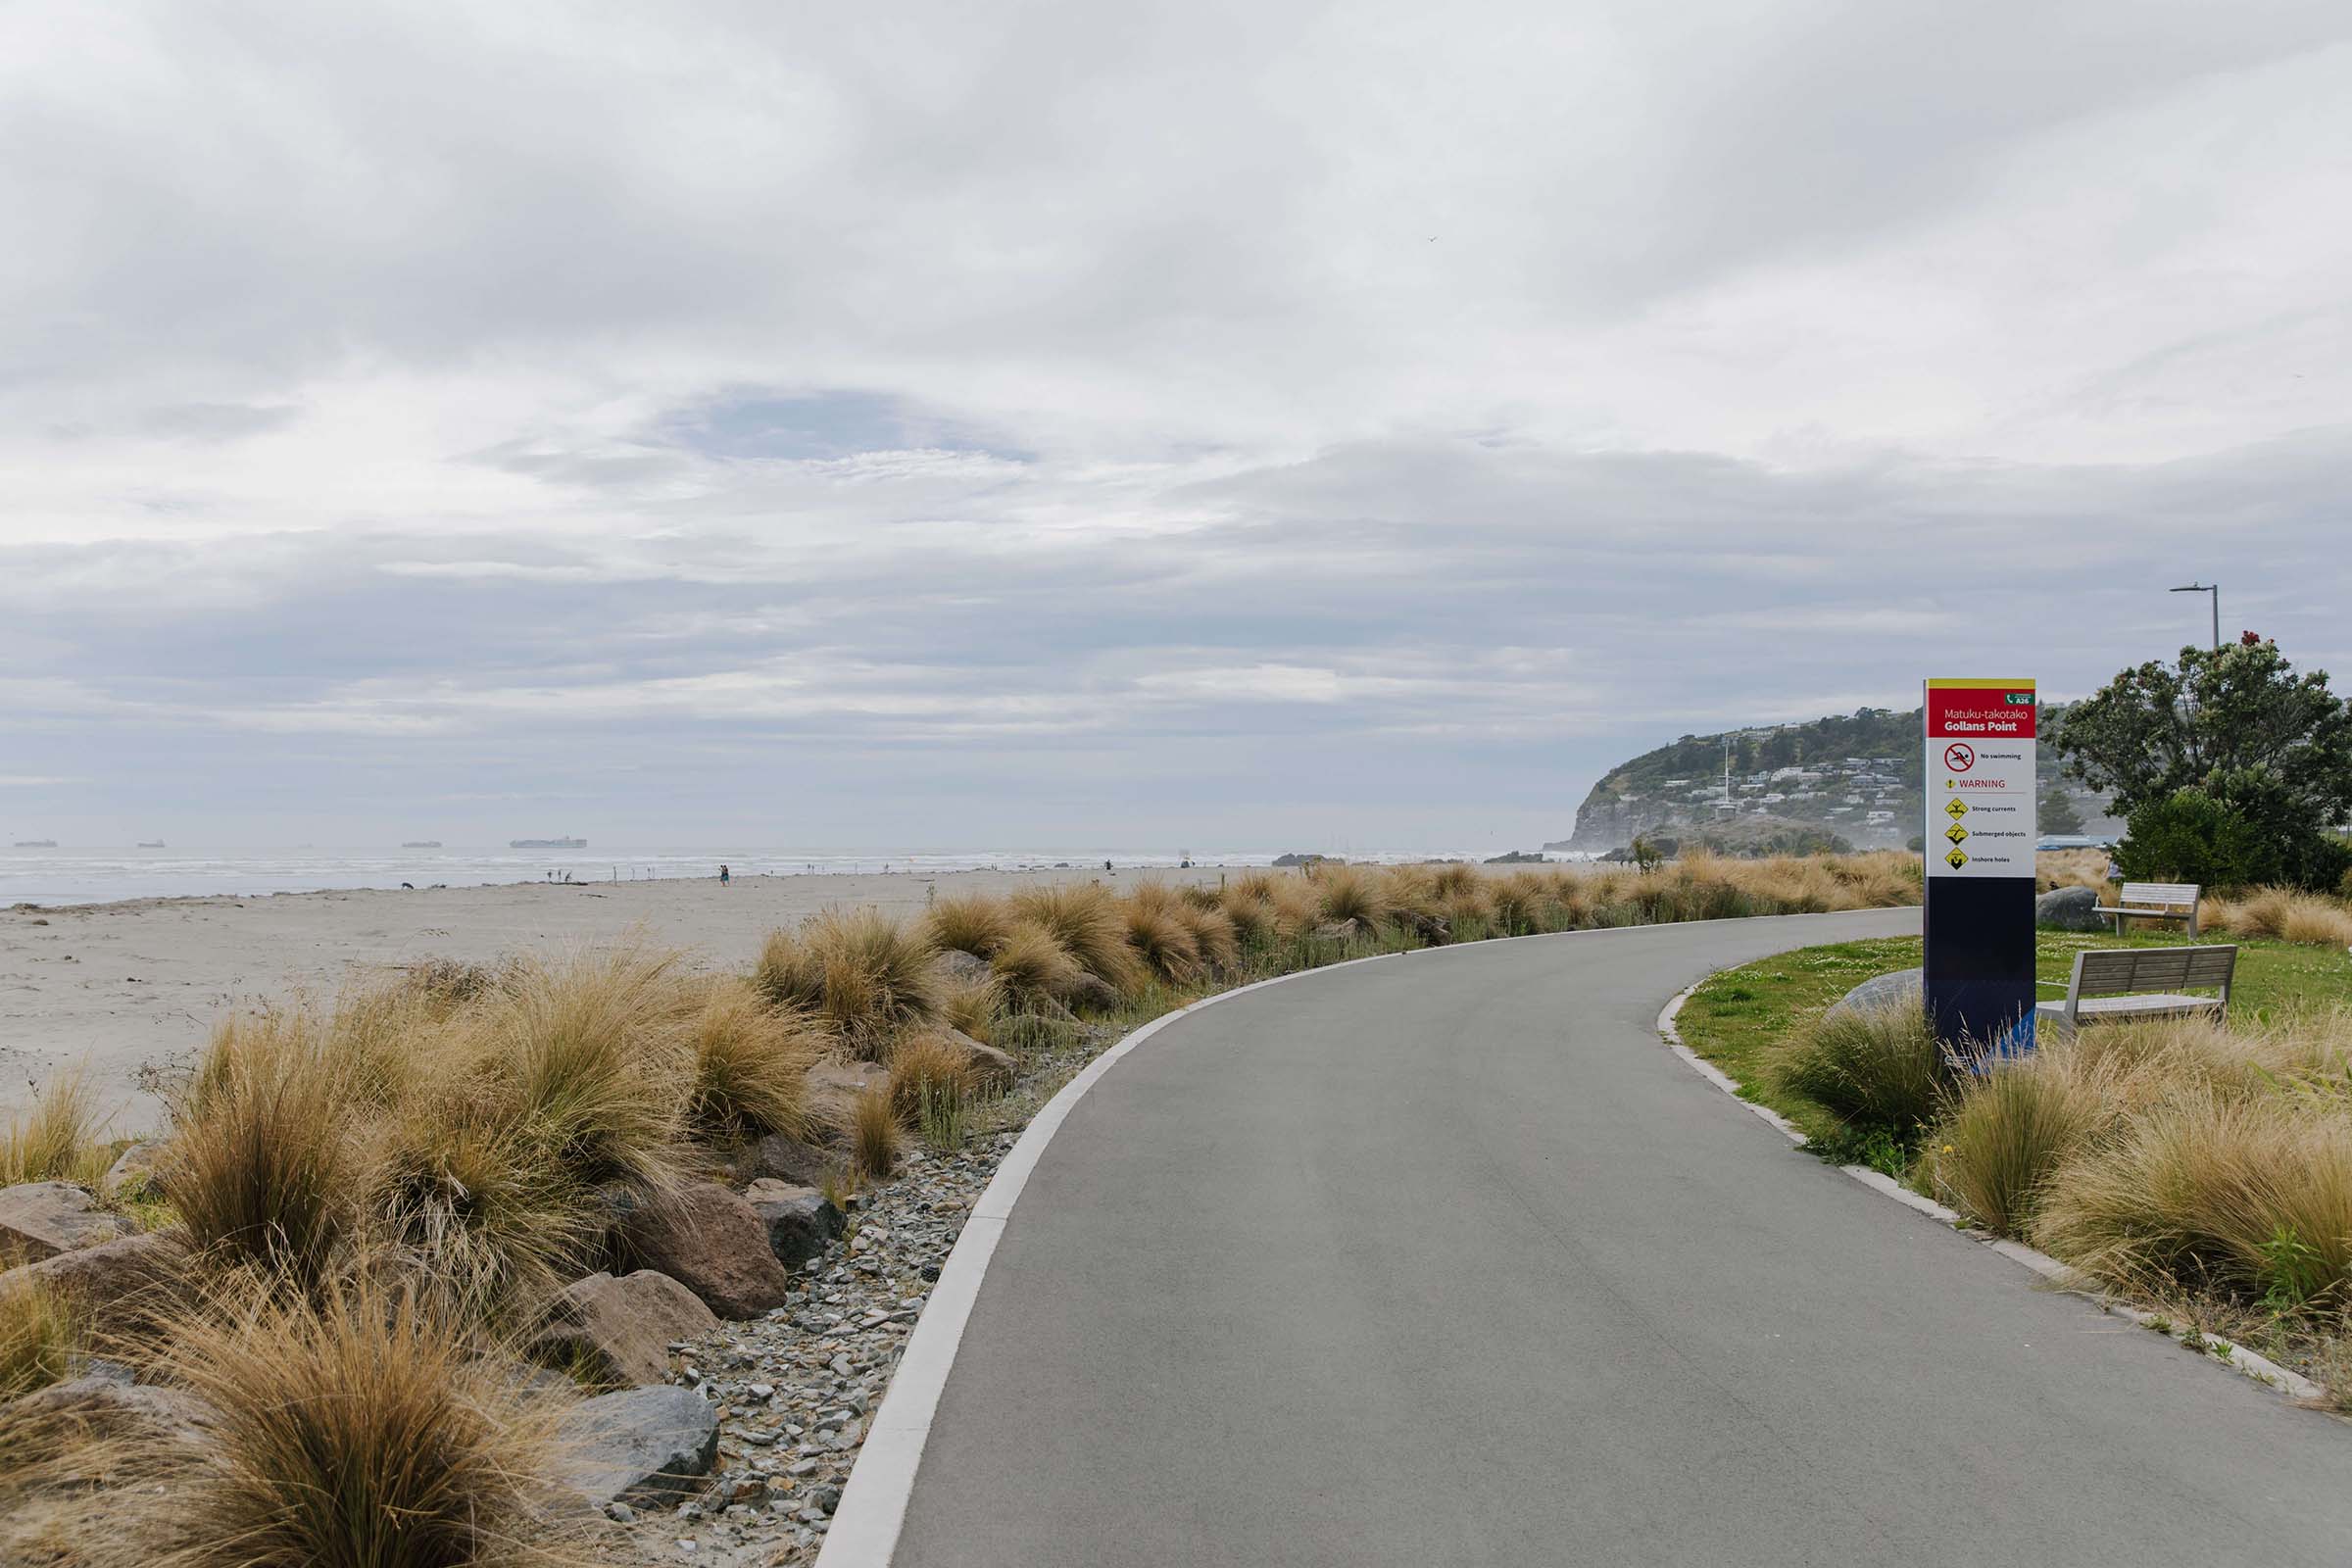 Coastal Pathway View Of Sumner Beach And Pathway Sign